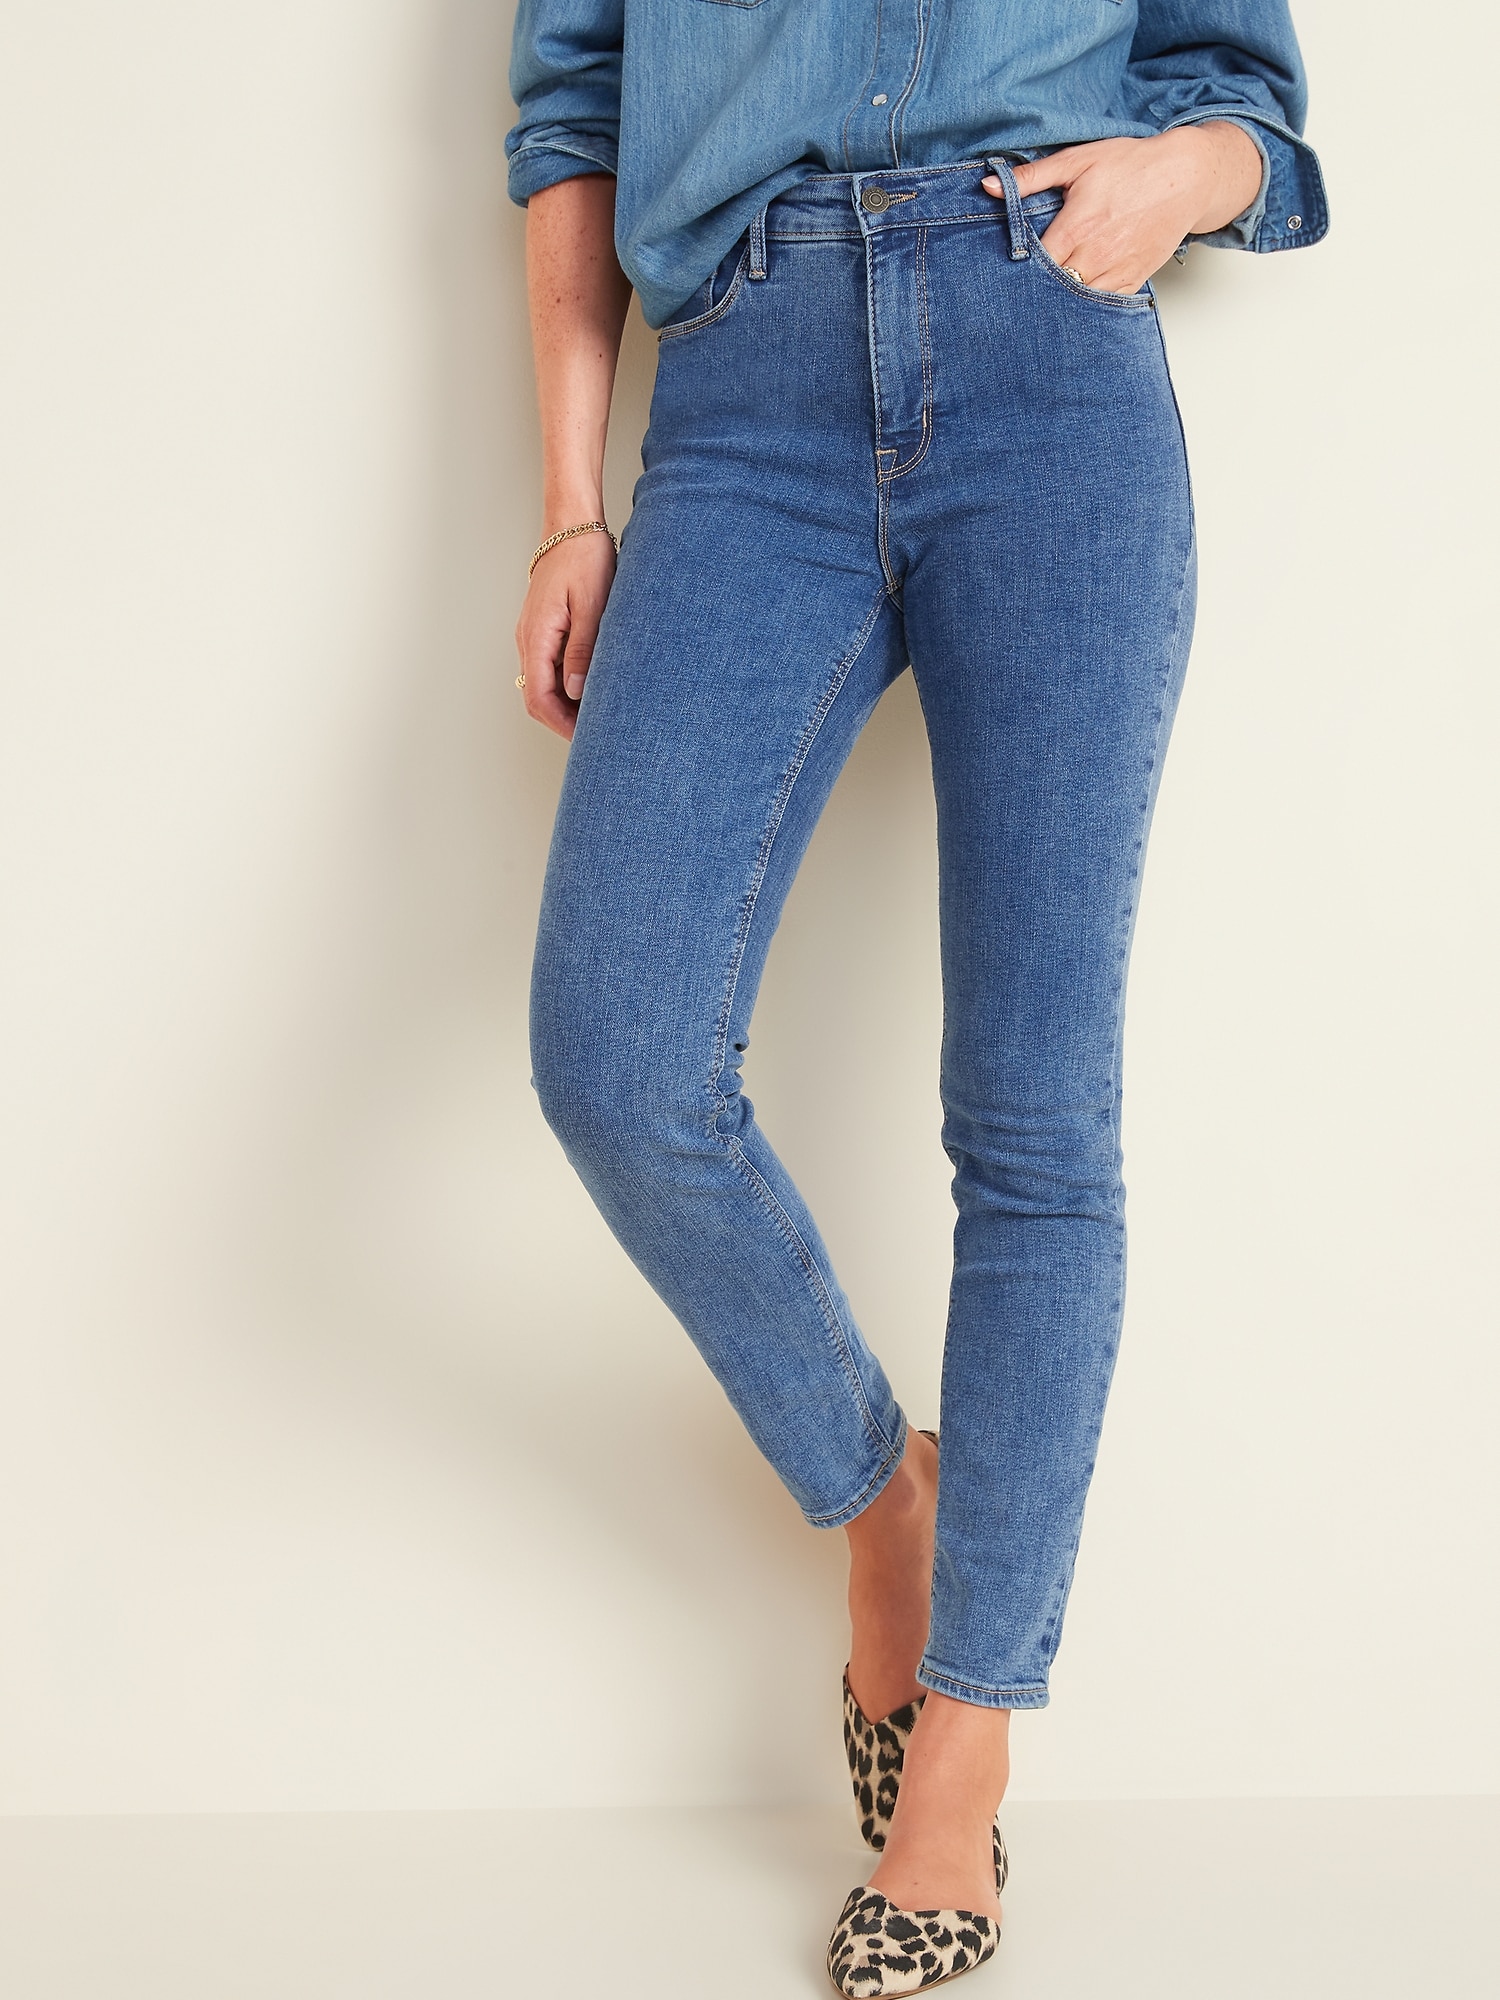 High-Waisted Rockstar Super-Skinny Jeans For Women - Old Navy